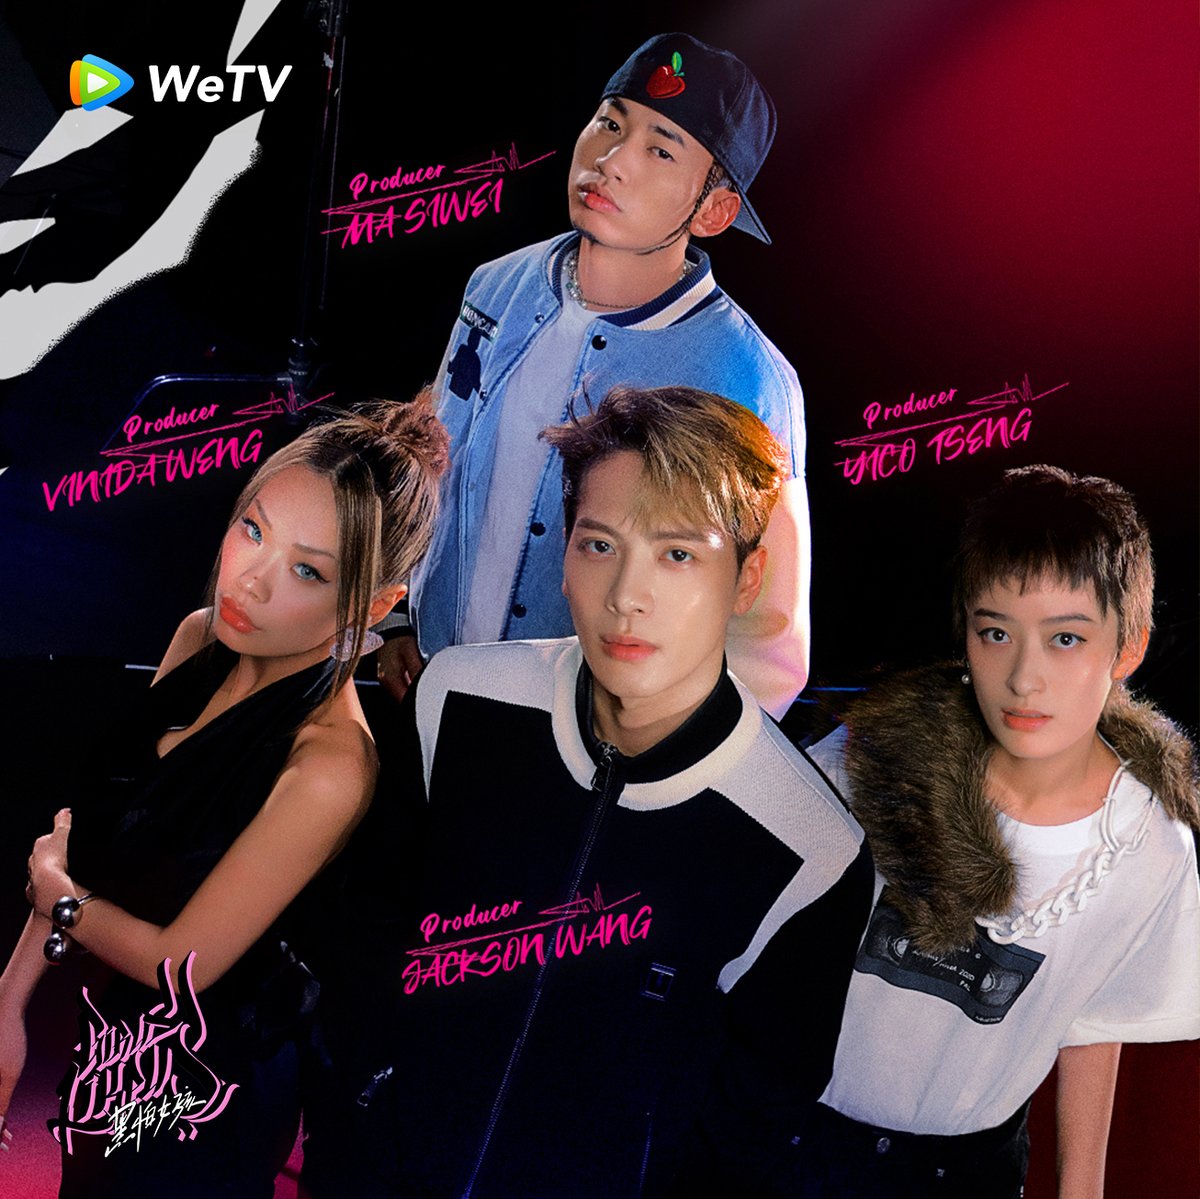 Jackies! Are you ready for the latest all-female rapper reality show [#GirlsLikeUs] mentored by #JacksonWang with #VinidaWeng, #Maswei of #HigherBrothers, #YicoTreng! Find out who'll be the first ultimate female rapper on #WeTVmy tonight at 8PM! #TeamWang bit.ly/GirlsLikeUs_We…